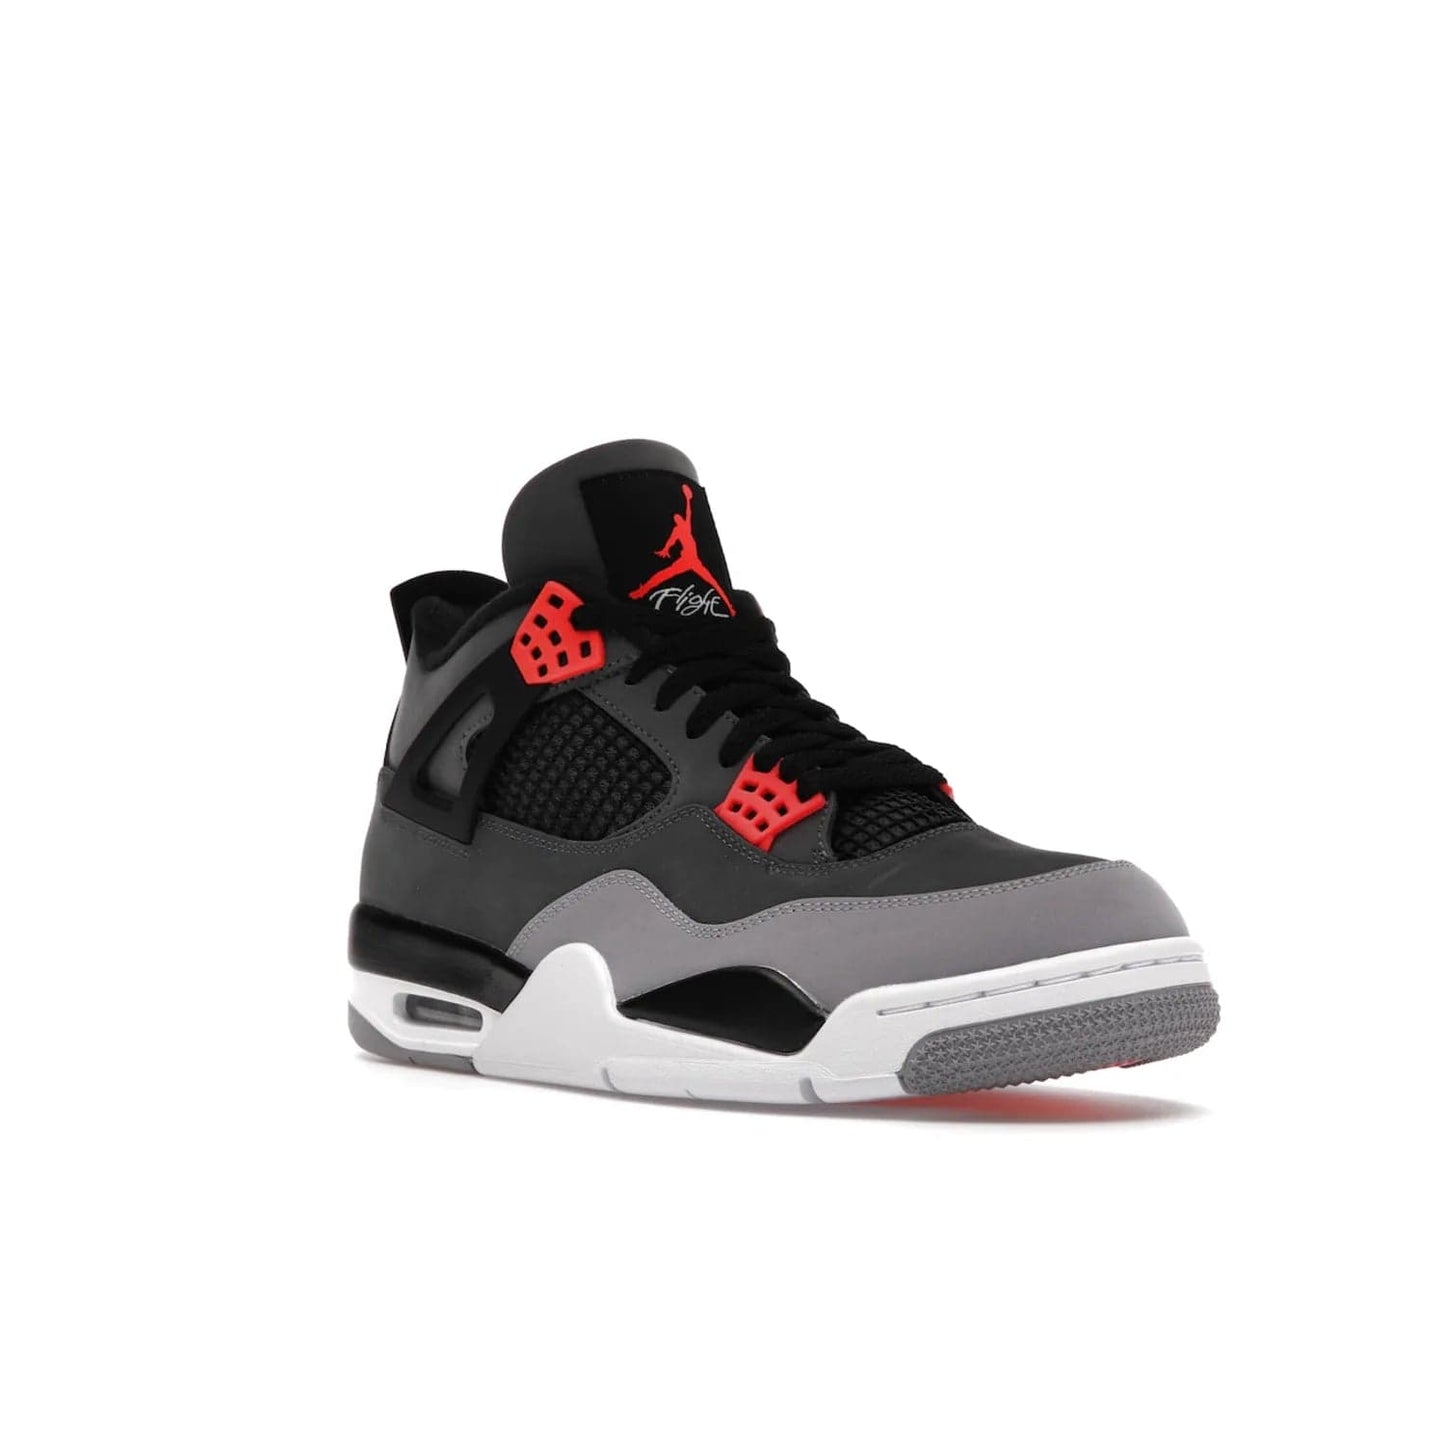 Jordan 4 Retro Infrared - Image 6 - Only at www.BallersClubKickz.com - Introducing the classic & timeless Air Jordan 4 Infrared. Durabuck upper, TPU mesh inserts, tech straps & heel tabs in dark grey and infrared accents. White sole with visible Air units. Out June 15, 2022. Get your pair now!